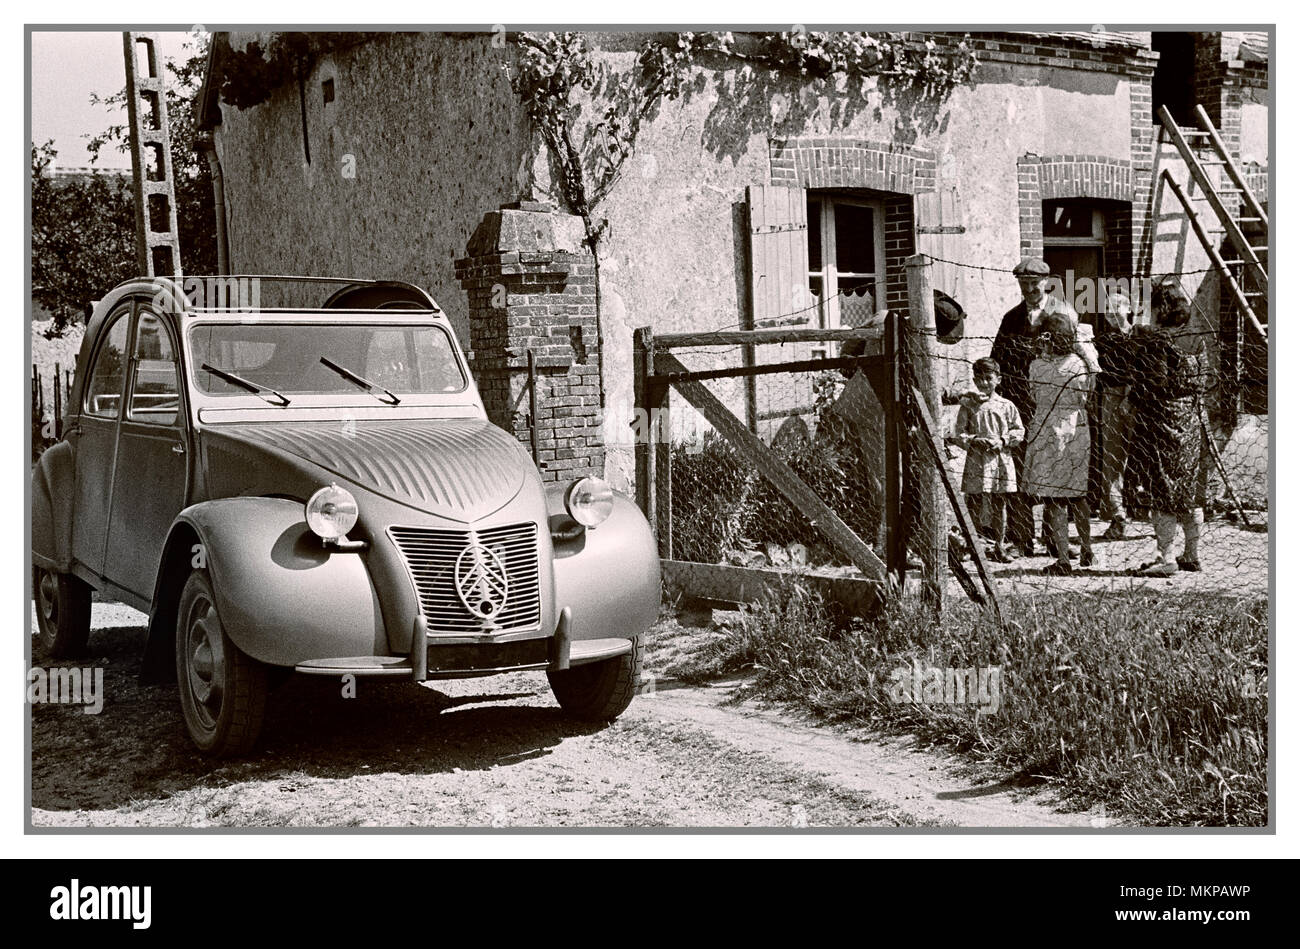 2CV VINTAGE FRENCH AUTOMOBILE 1950's Citroën 2CV deux chevaux 1950 typical notable family French car in French rural surroundings for French press advertising designed by Flaminio Bertoni: Stock Photo